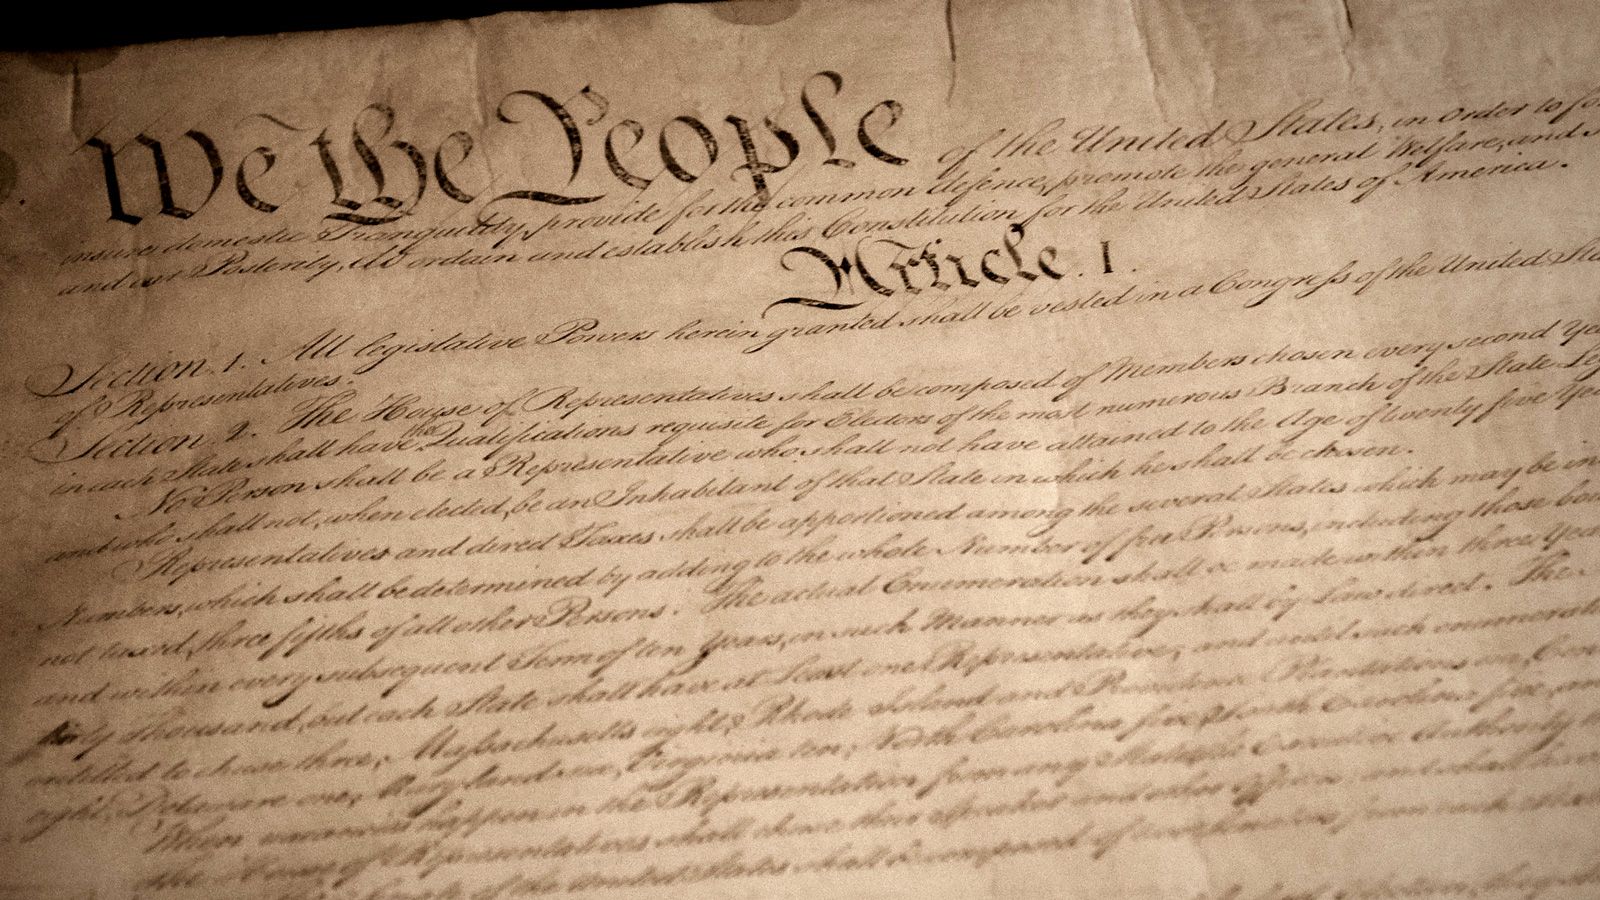 Photo of the Declaration of Independence of the United States of America, from the National Archives